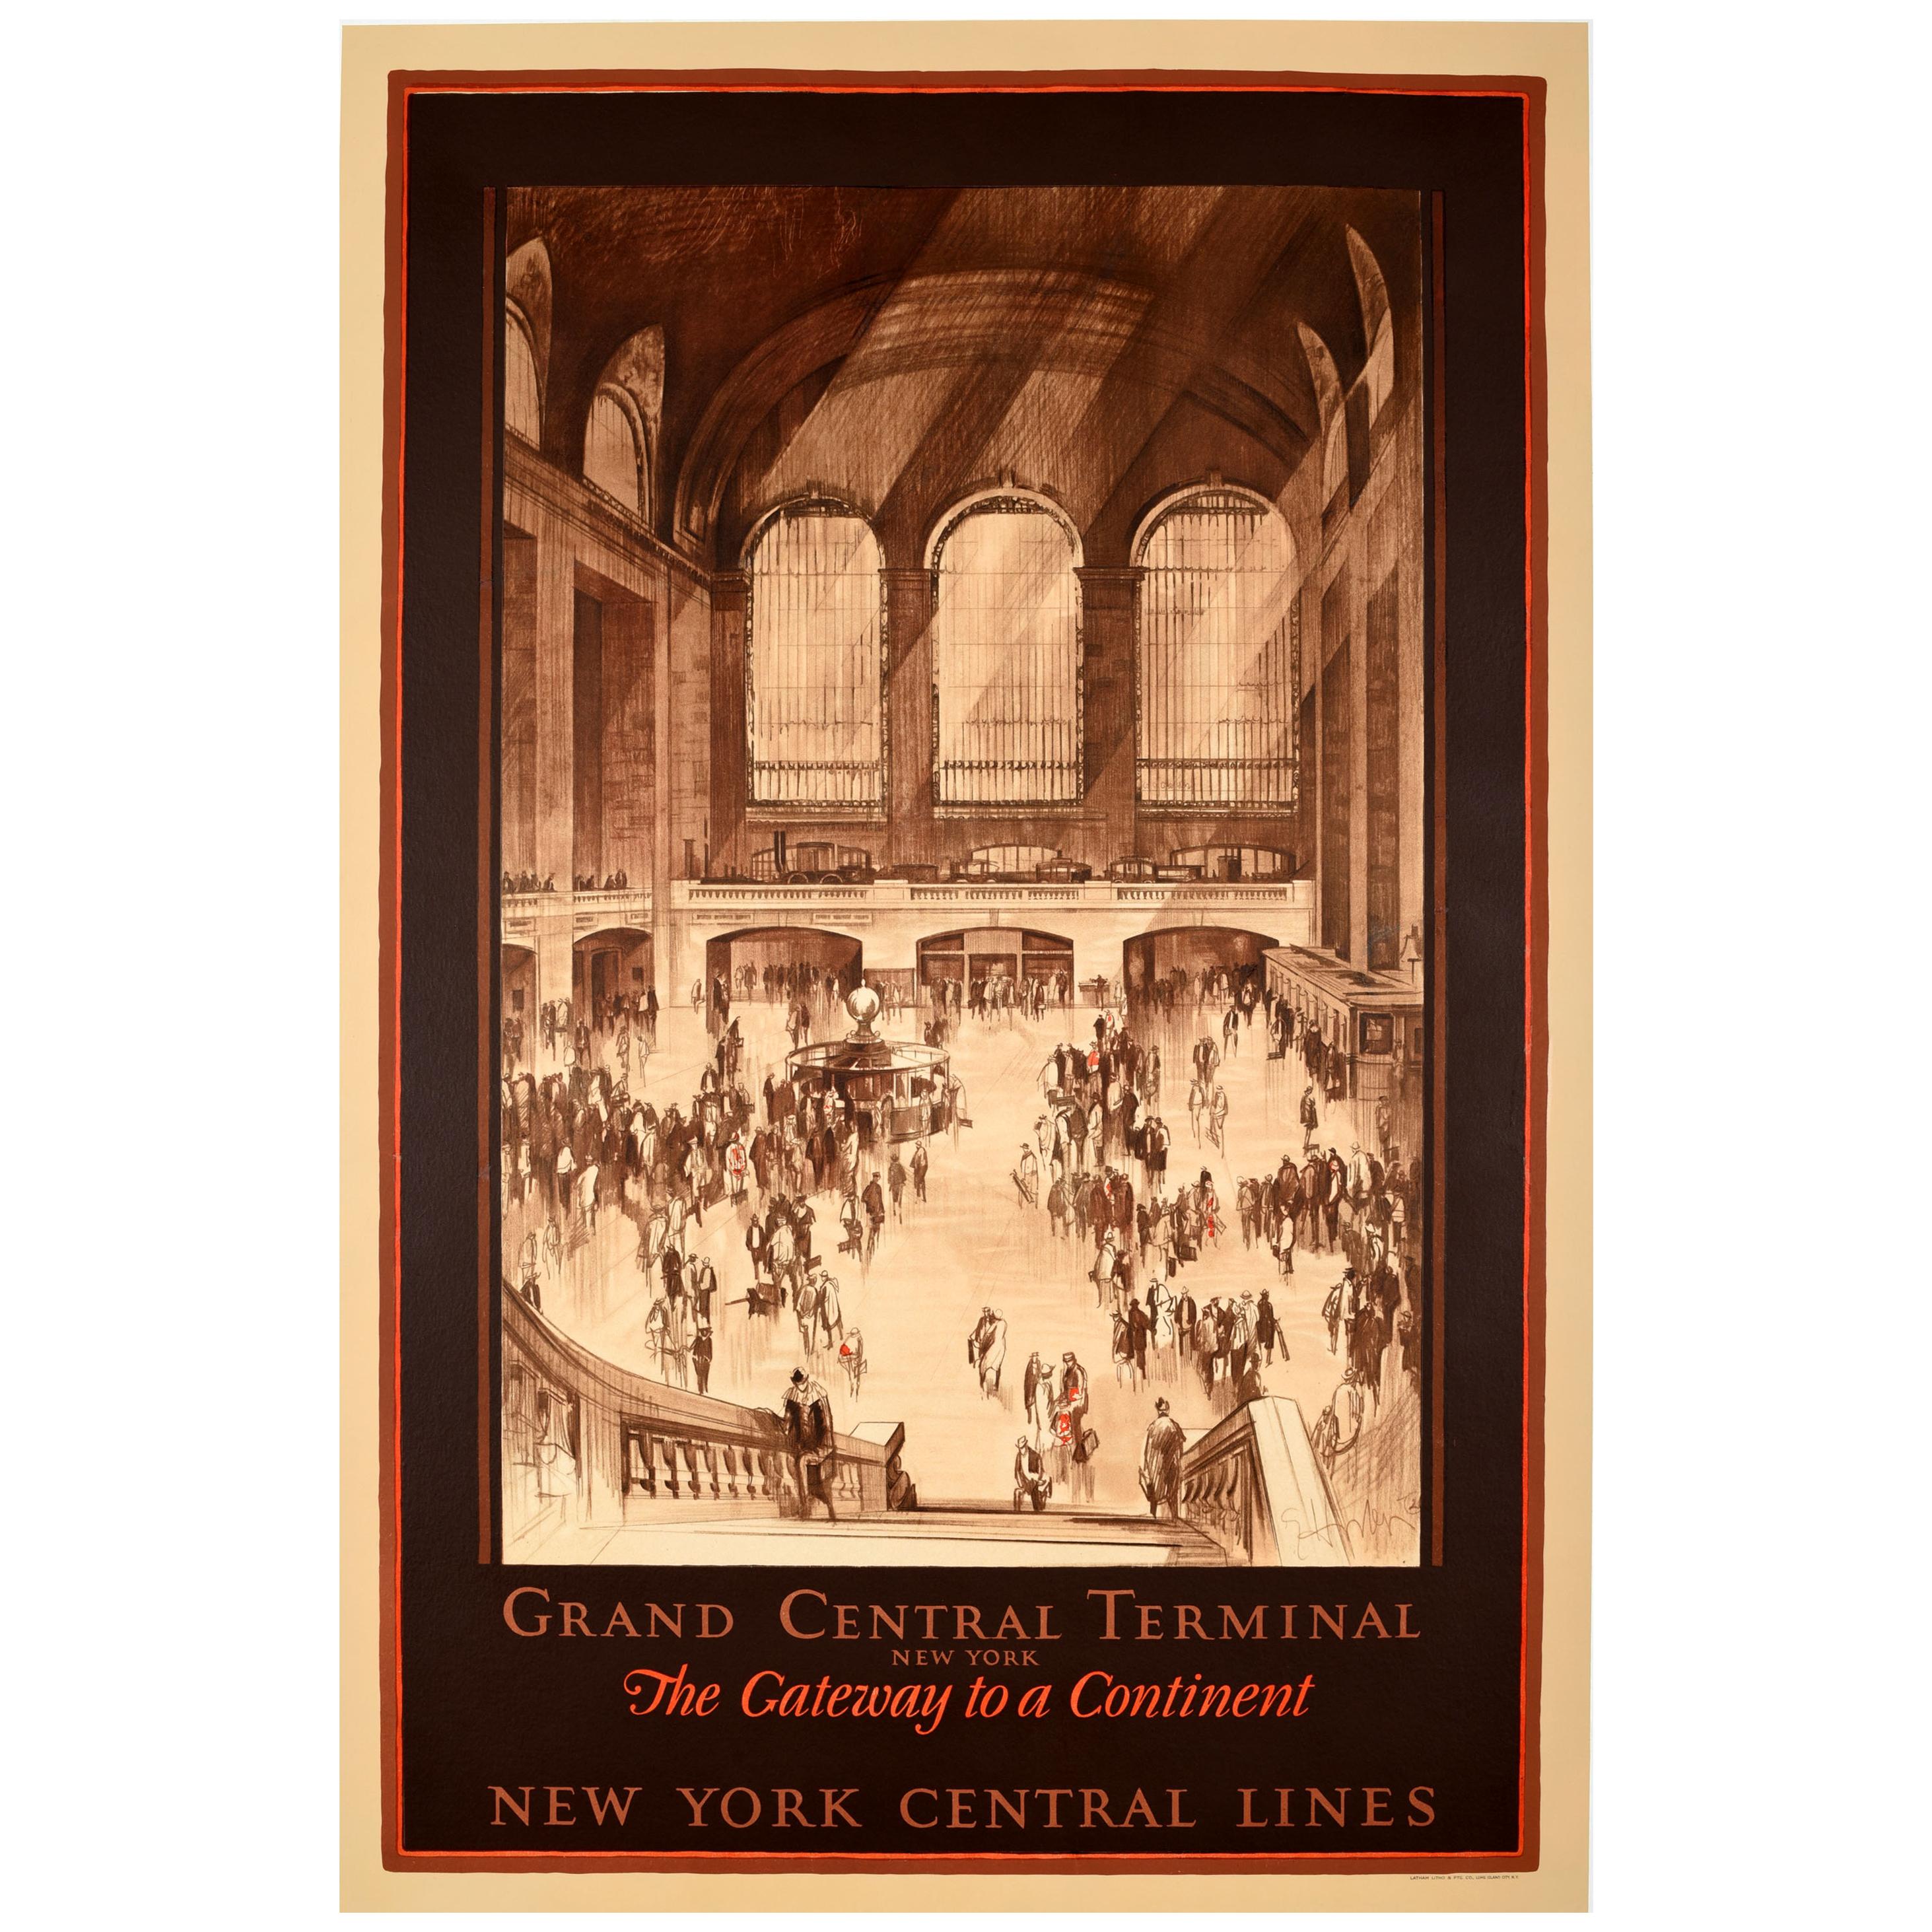 Original Vintage US Railway Poster Grand Central Terminal New York Central Lines